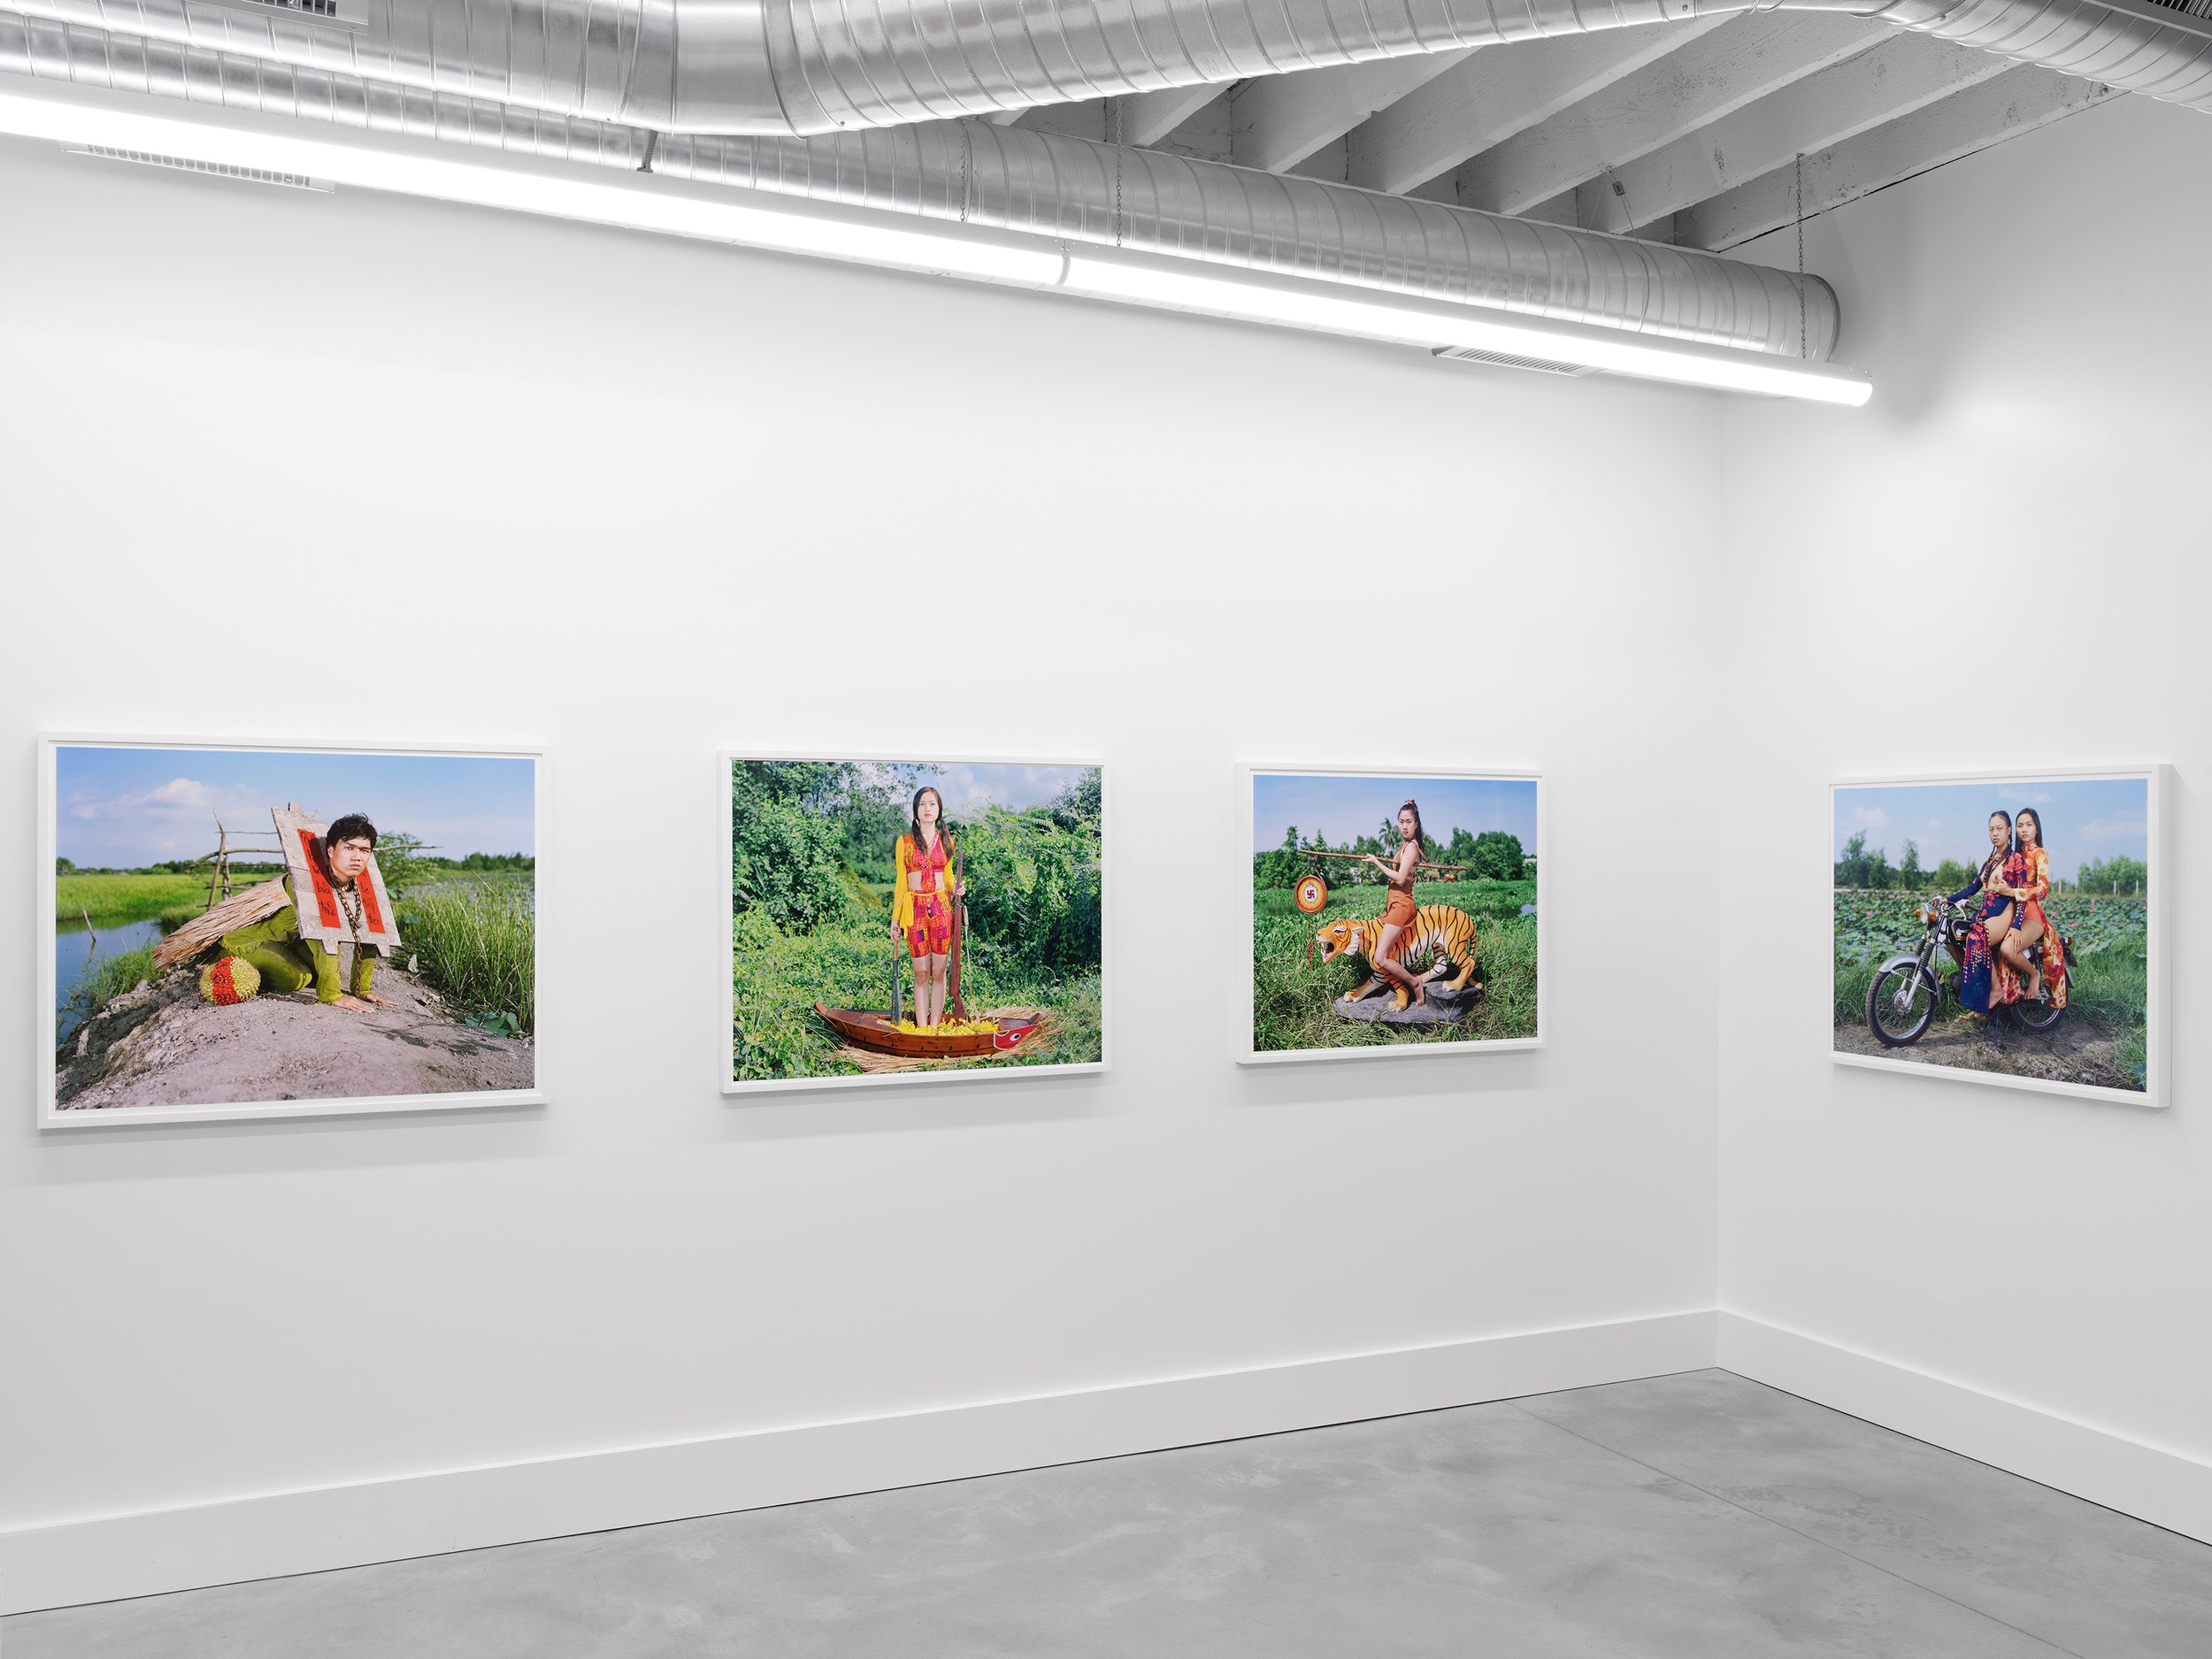  Installation view of Olivier Laude:   Chiến Thắng Ba Tơ left to right:  Cáng-e, Sis{Quynh}-naut, Hổ Di, &amp; Pro Bono Publico II,  